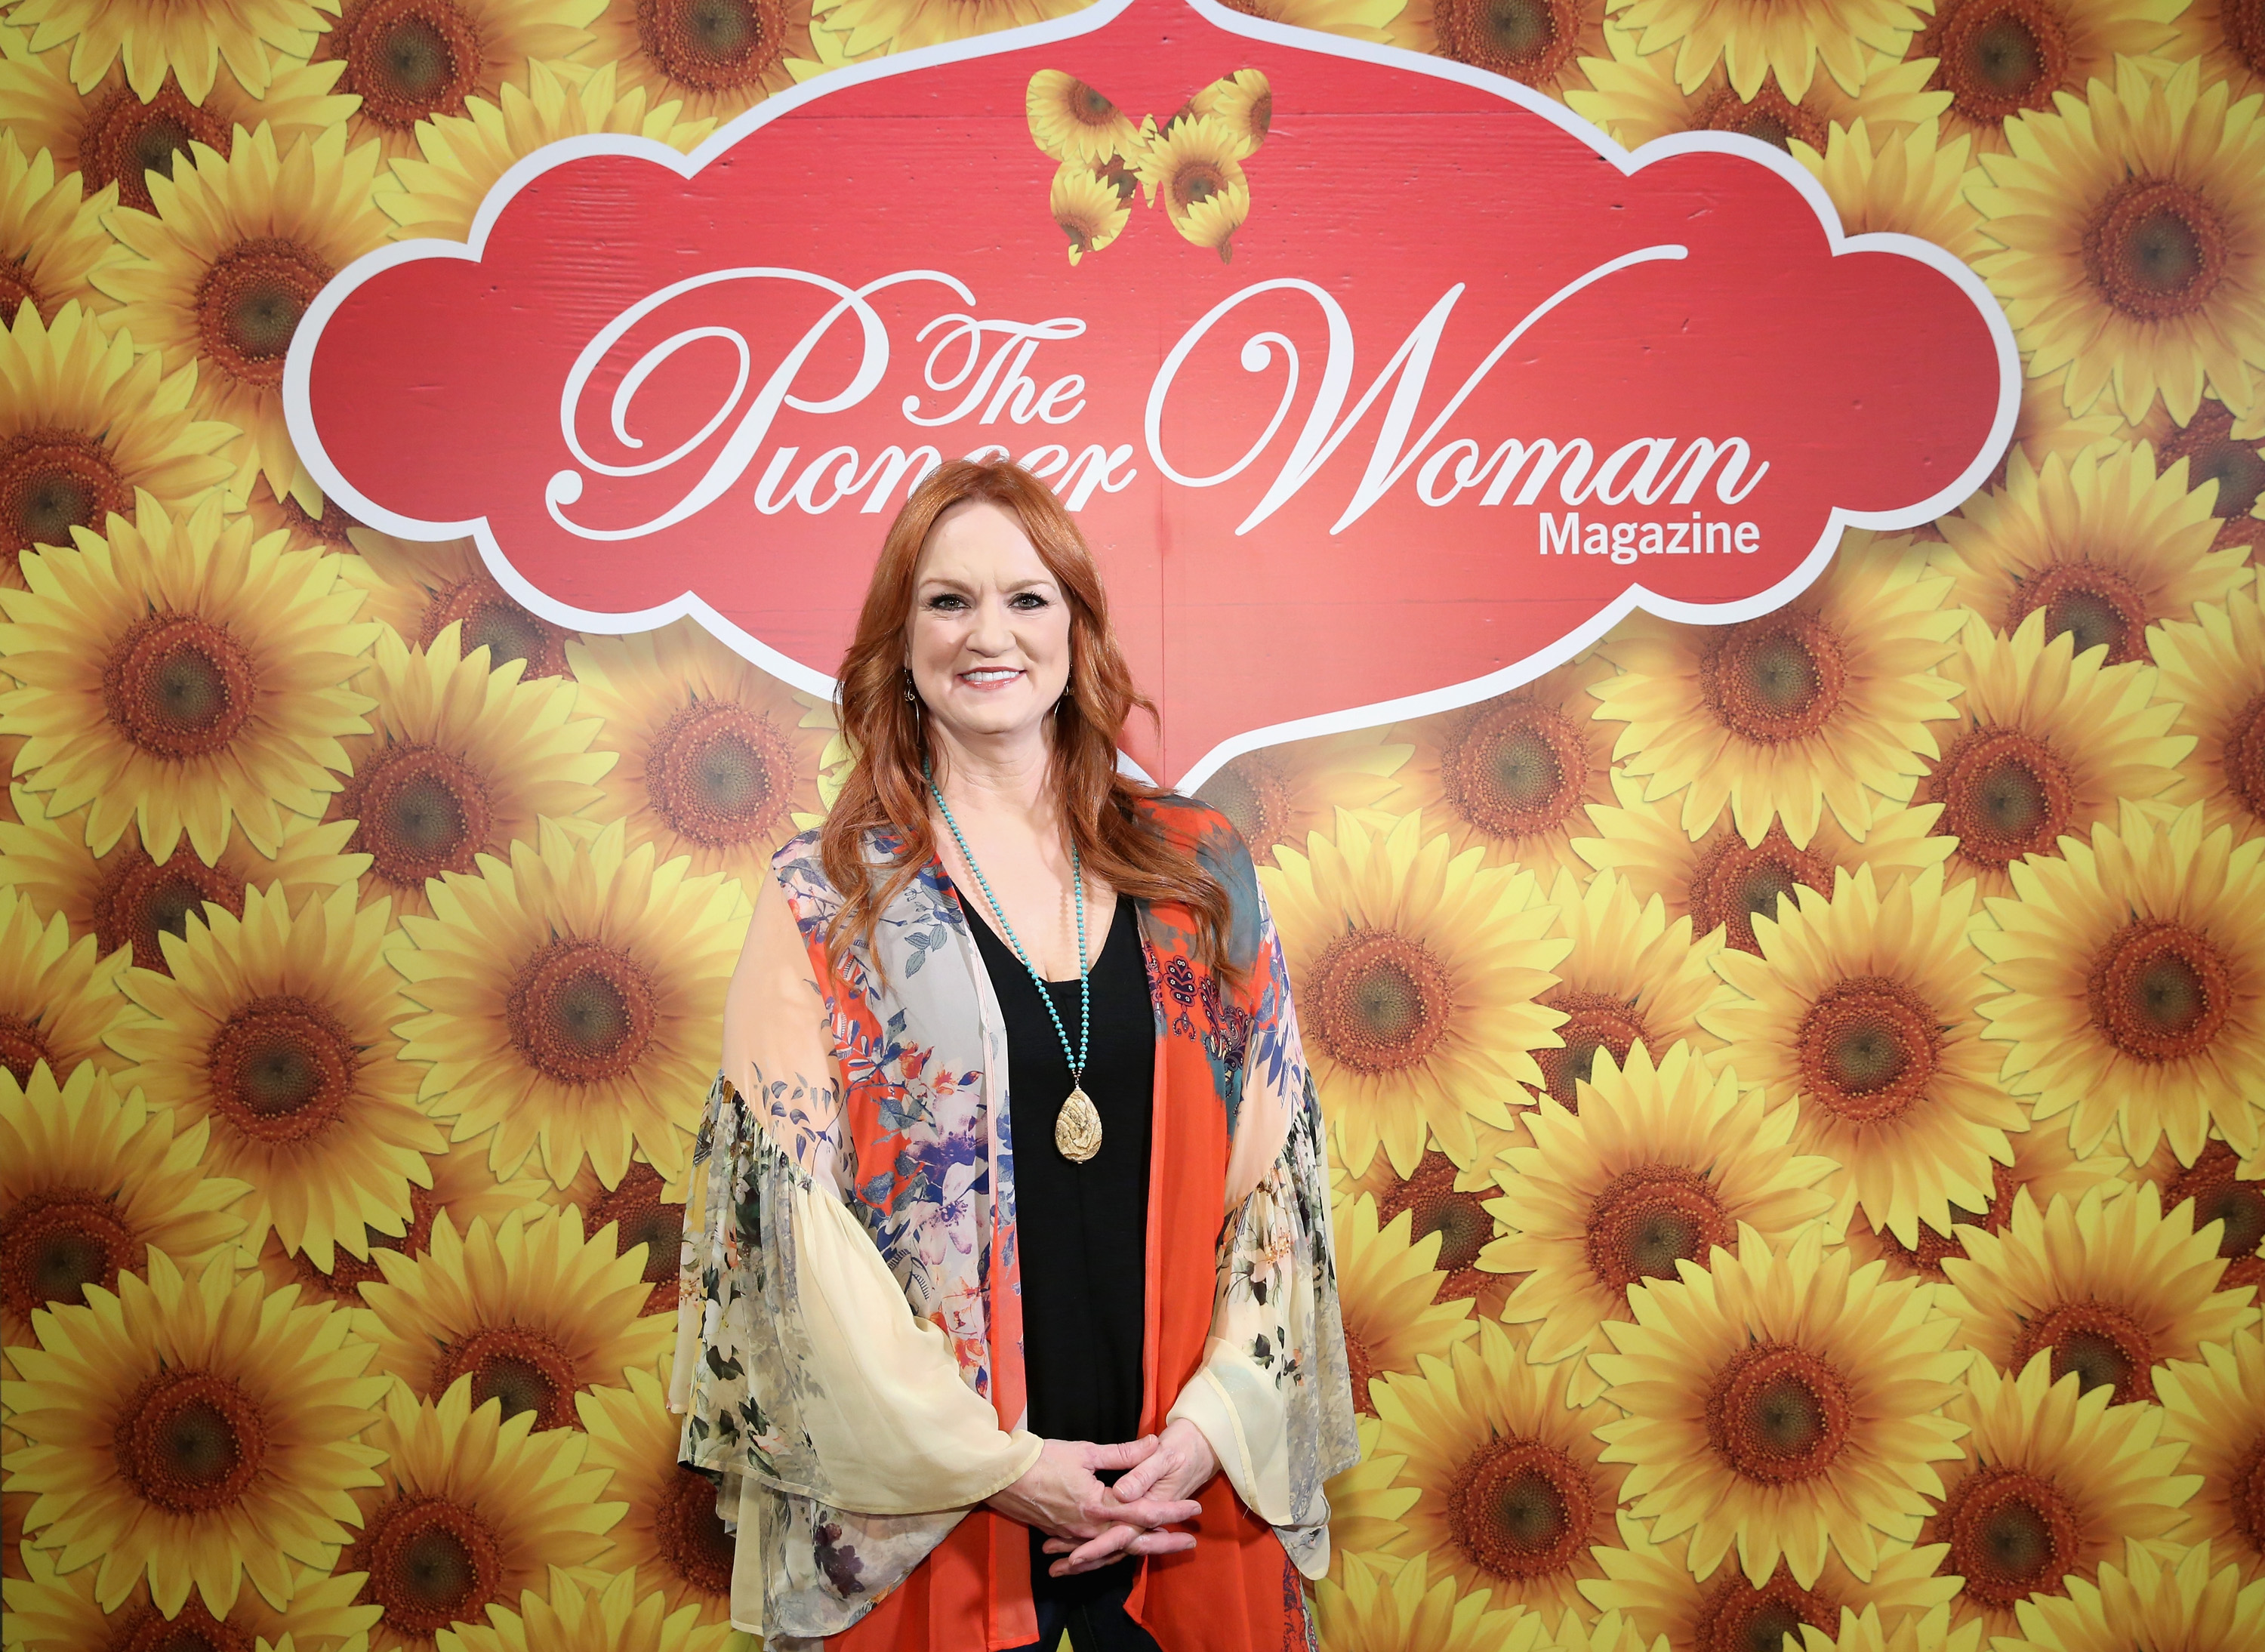 Food Network star Ree Drummond wears a long-sleeved multi-colored top in this photograph.